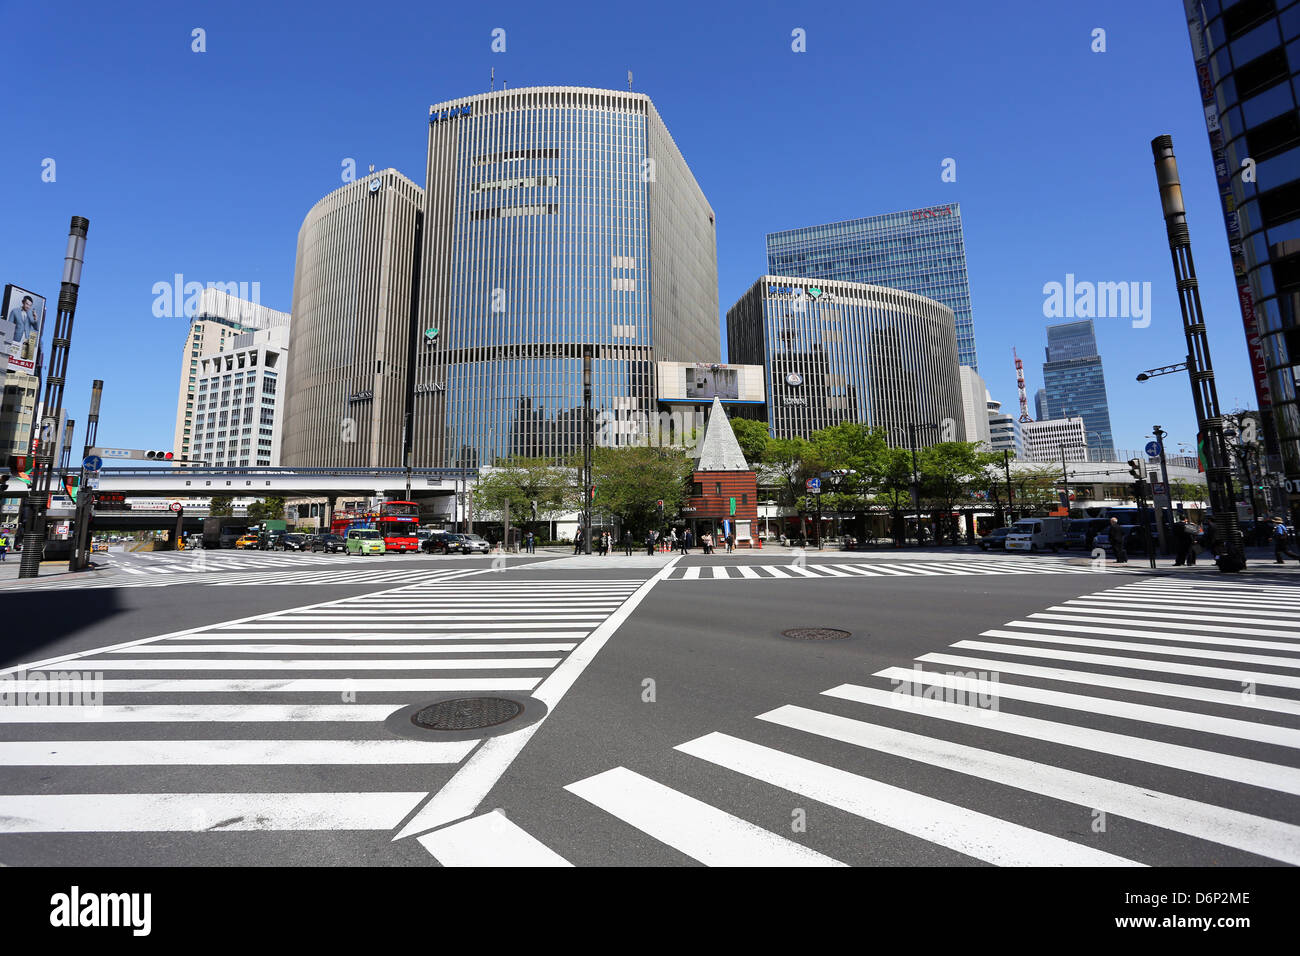 Japanese street scene of modern buildings and a pedestrian crossing in Ginza, Tokyo, Japan Stock Photo